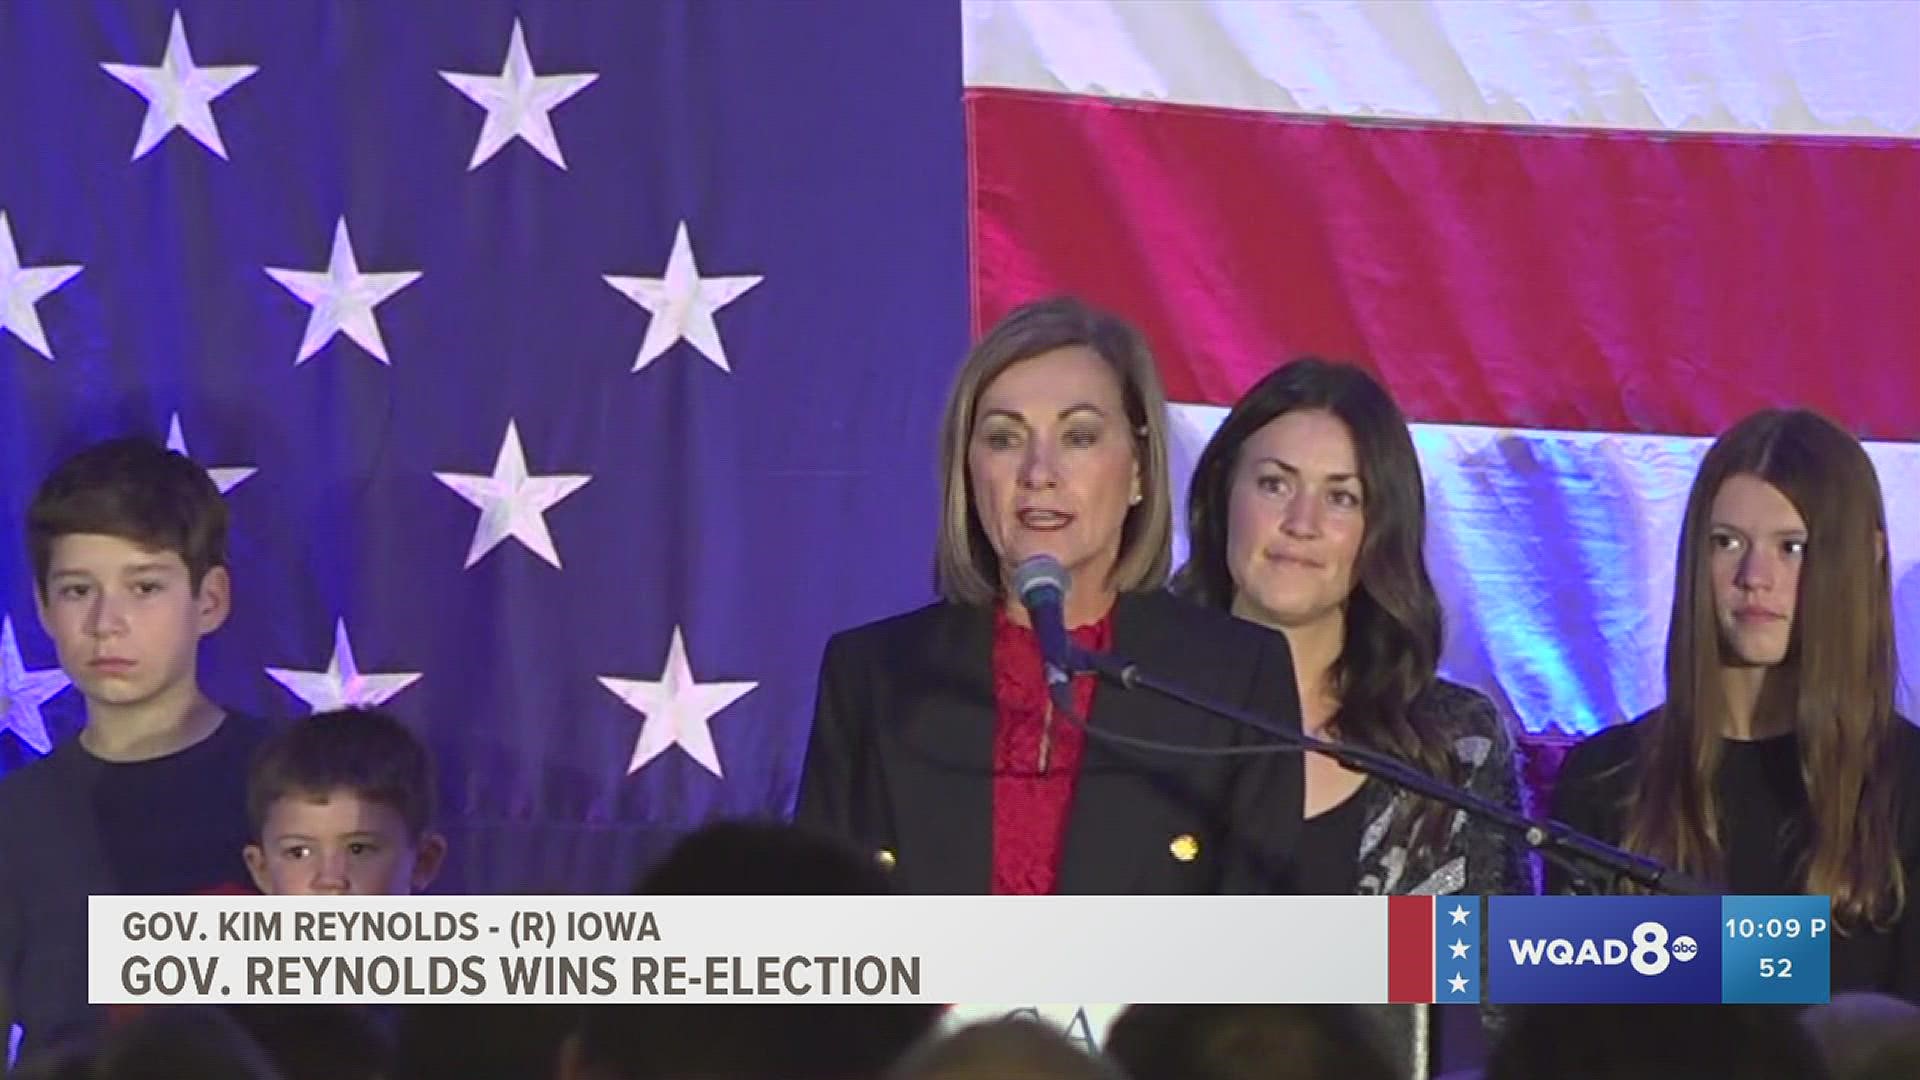 While votes are still being tallied, the Associated Press reports Reynolds will serve a second full term as Iowa governor.